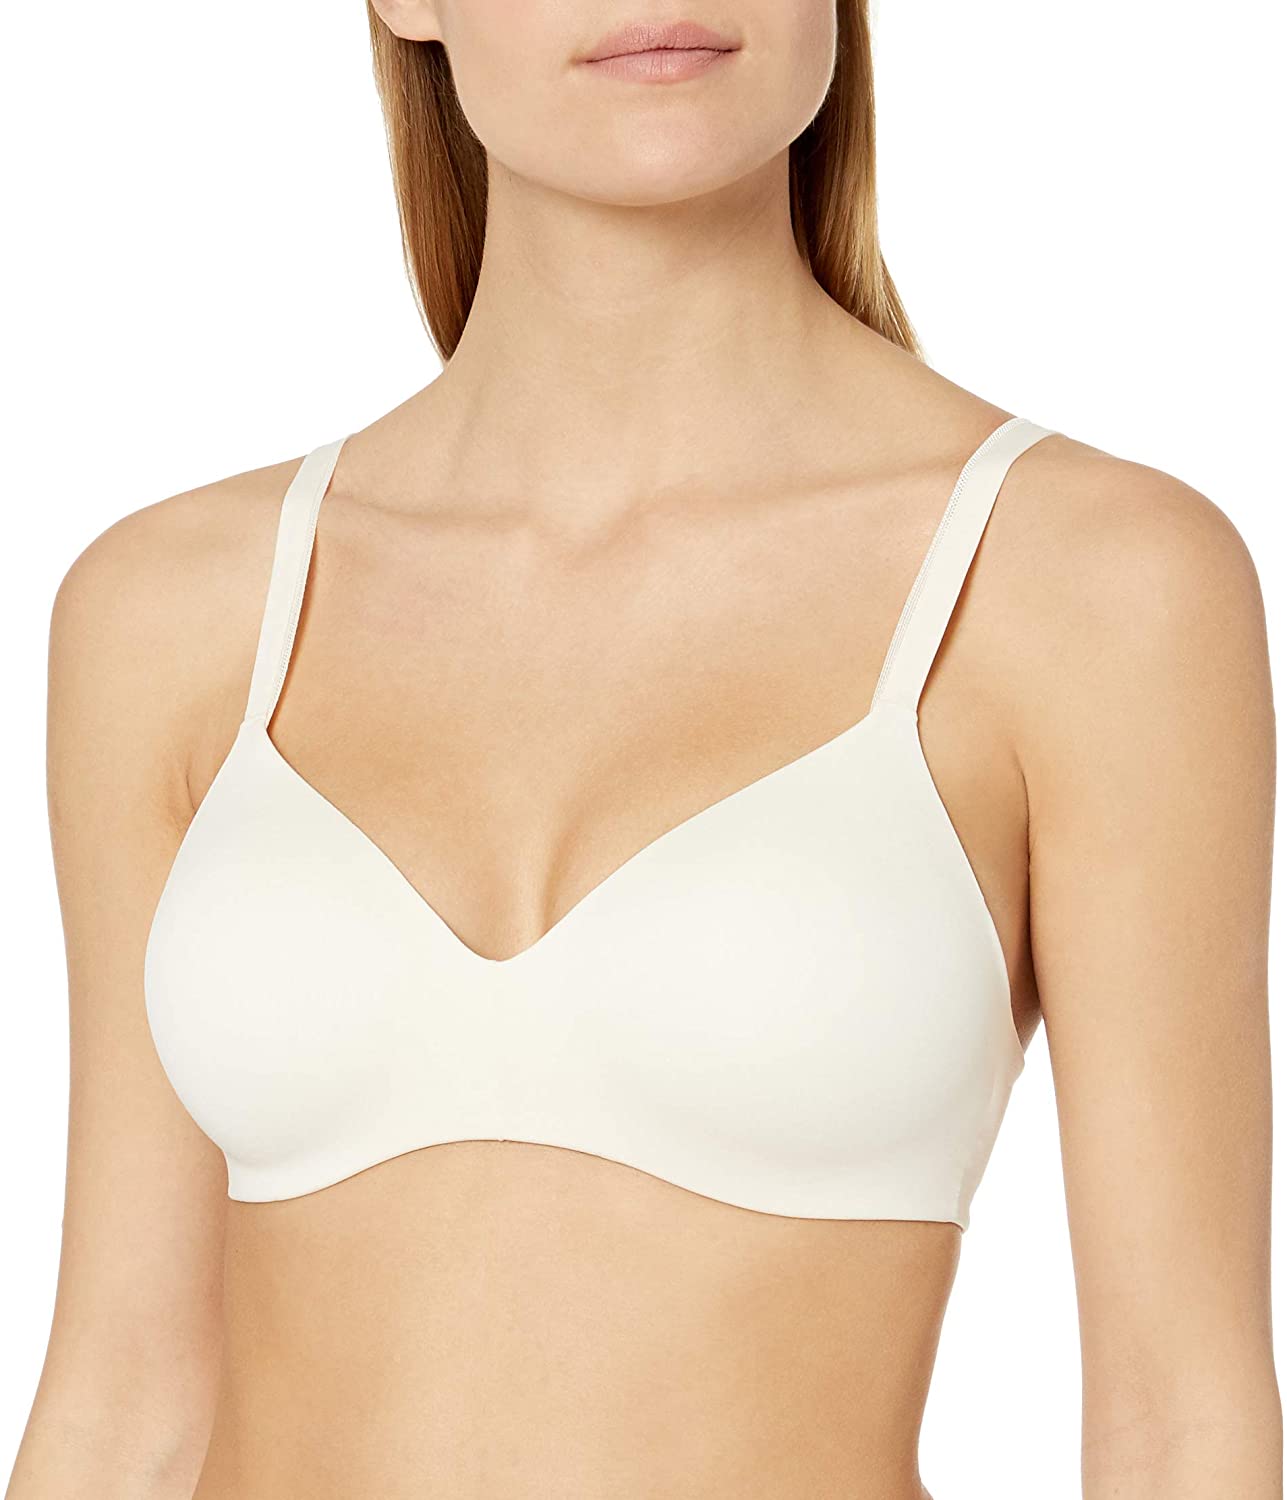 12 best bras for large busts herstylecode 1 12 Best Bras for Big Busts 2023 - Top Rated Bras for Bigger Busts